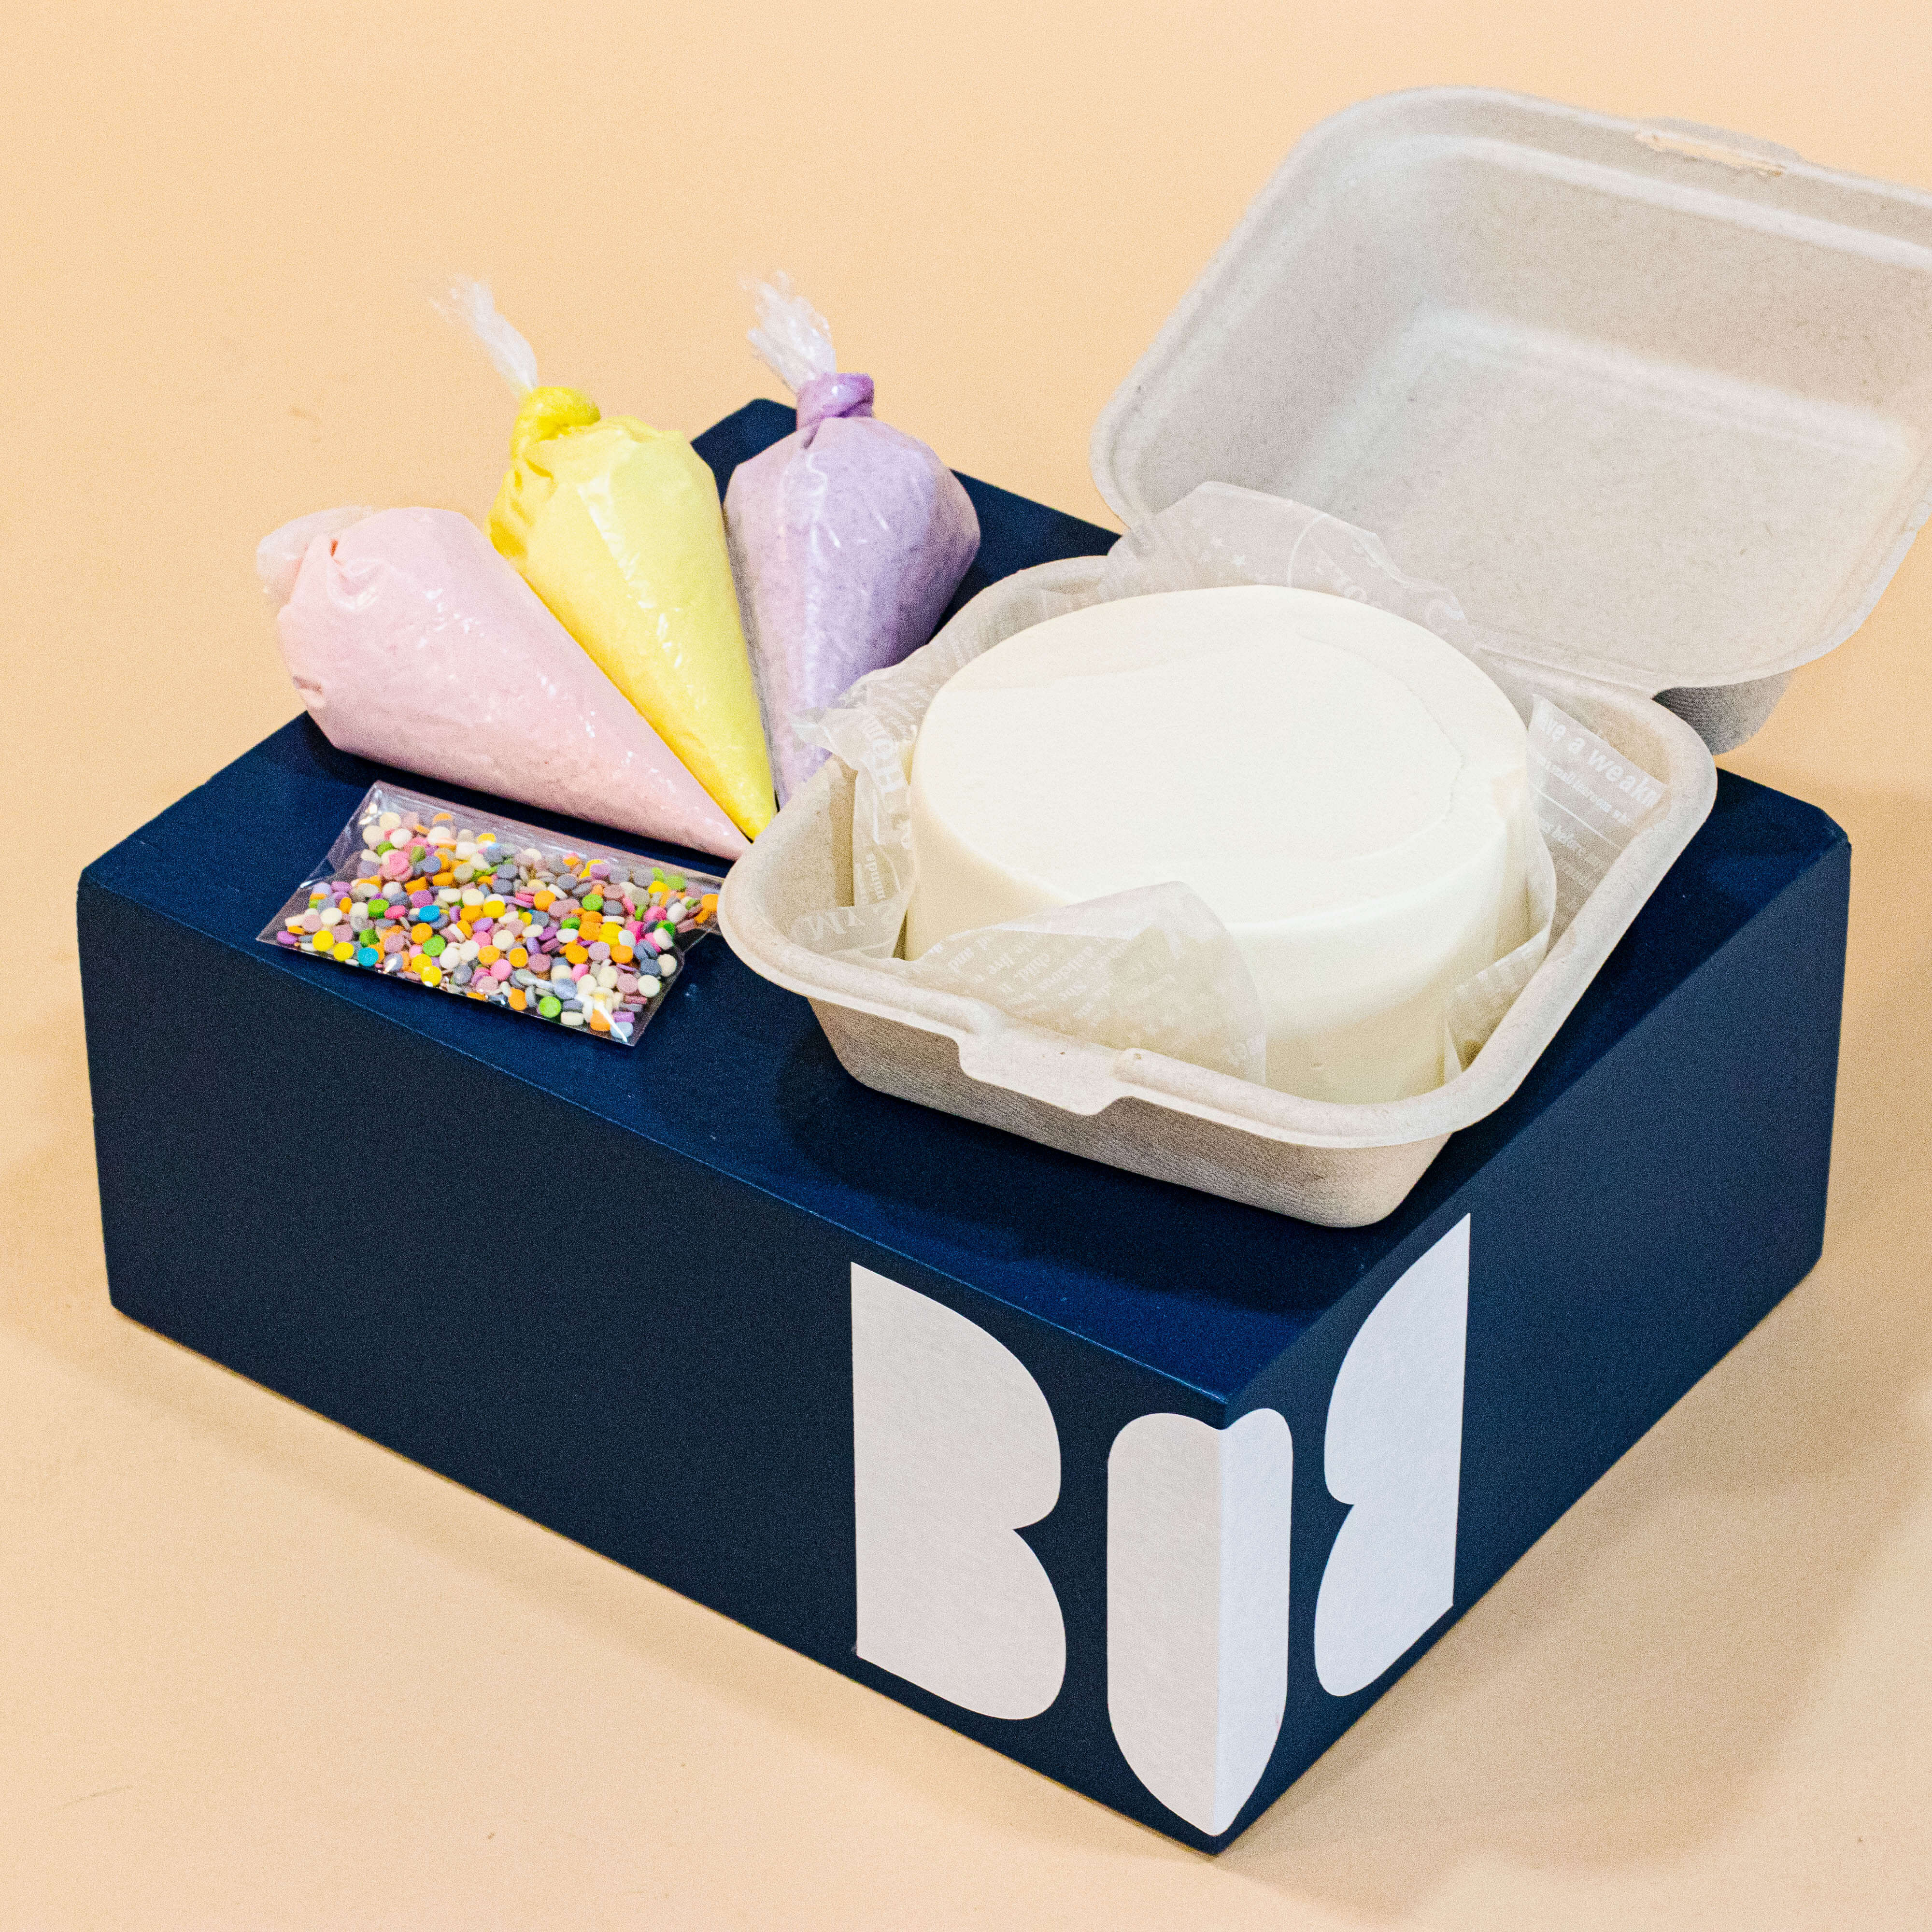 Reasons to Order a DIY Bento Cake Delivery Today!